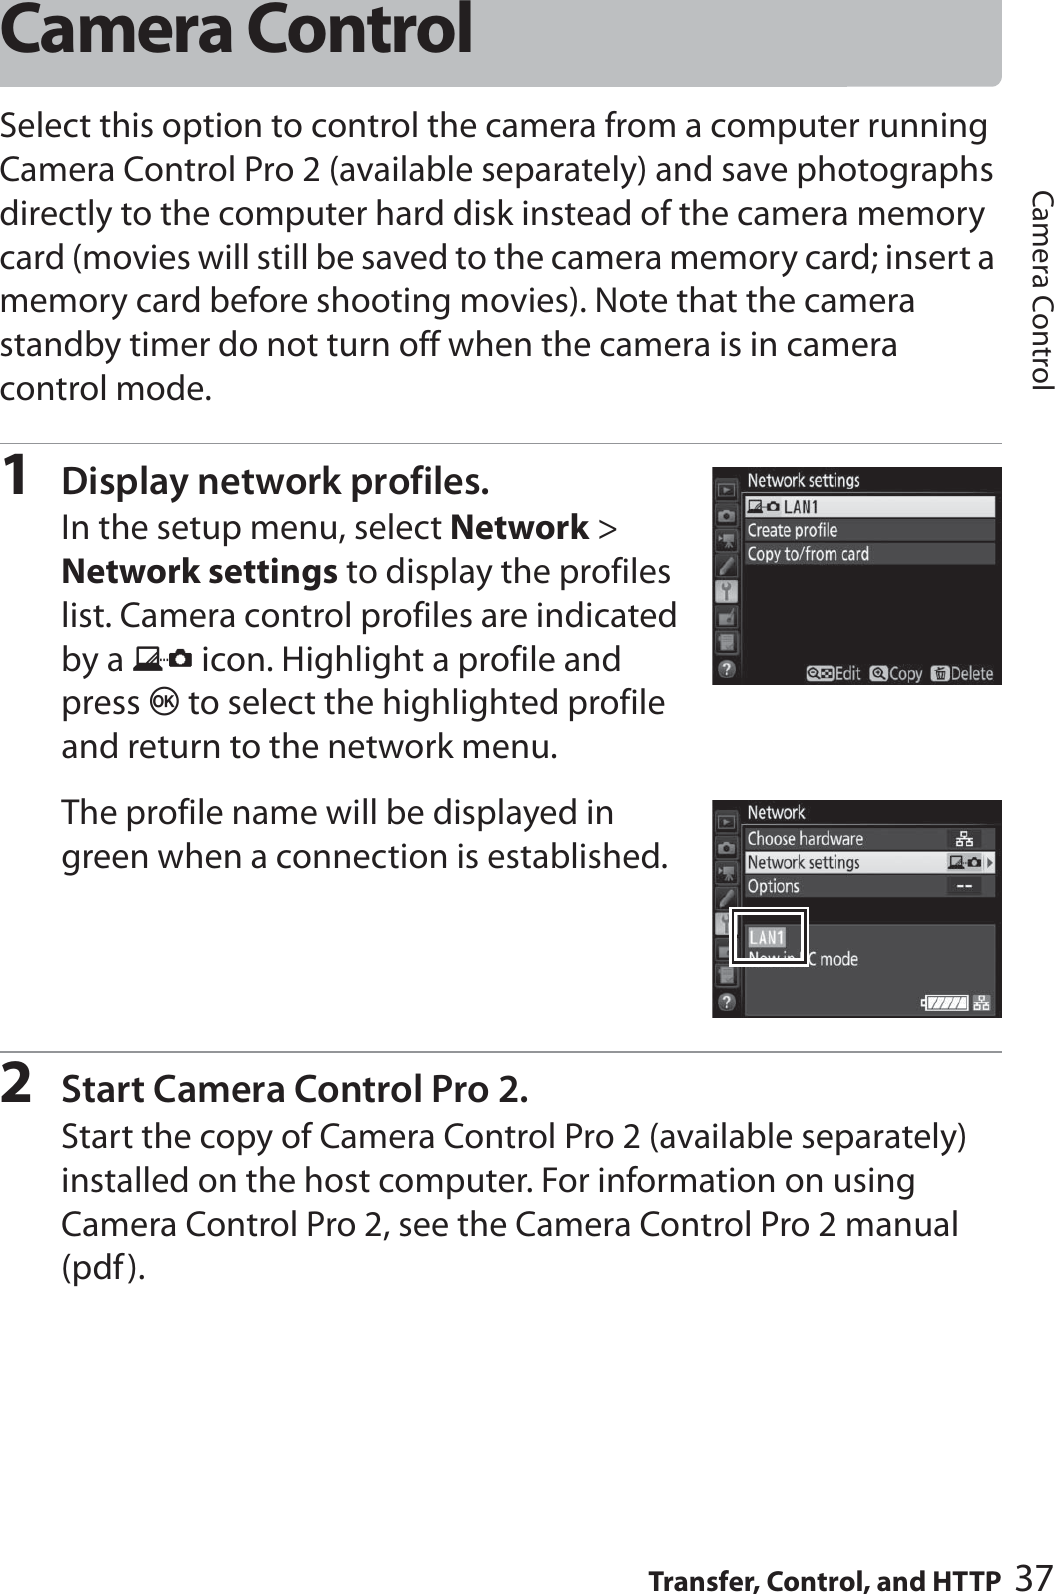 37Transfer, Control, and HTTPCamera ControlCamera ControlSelect this option to control the camera from a computer running Camera Control Pro 2 (available separately) and save photographs directly to the computer hard disk instead of the camera memory card (movies will still be saved to the camera memory card; insert a memory card before shooting movies). Note that the camera standby timer do not turn off when the camera is in camera control mode.1Display network profiles.In the setup menu, select Network &gt; Network settings to display the profiles list. Camera control profiles are indicated by a L icon. Highlight a profile and press J to select the highlighted profile and return to the network menu. The profile name will be displayed in green when a connection is established.2Start Camera Control Pro 2.Start the copy of Camera Control Pro 2 (available separately) installed on the host computer. For information on using Camera Control Pro 2, see the Camera Control Pro 2 manual (pdf).